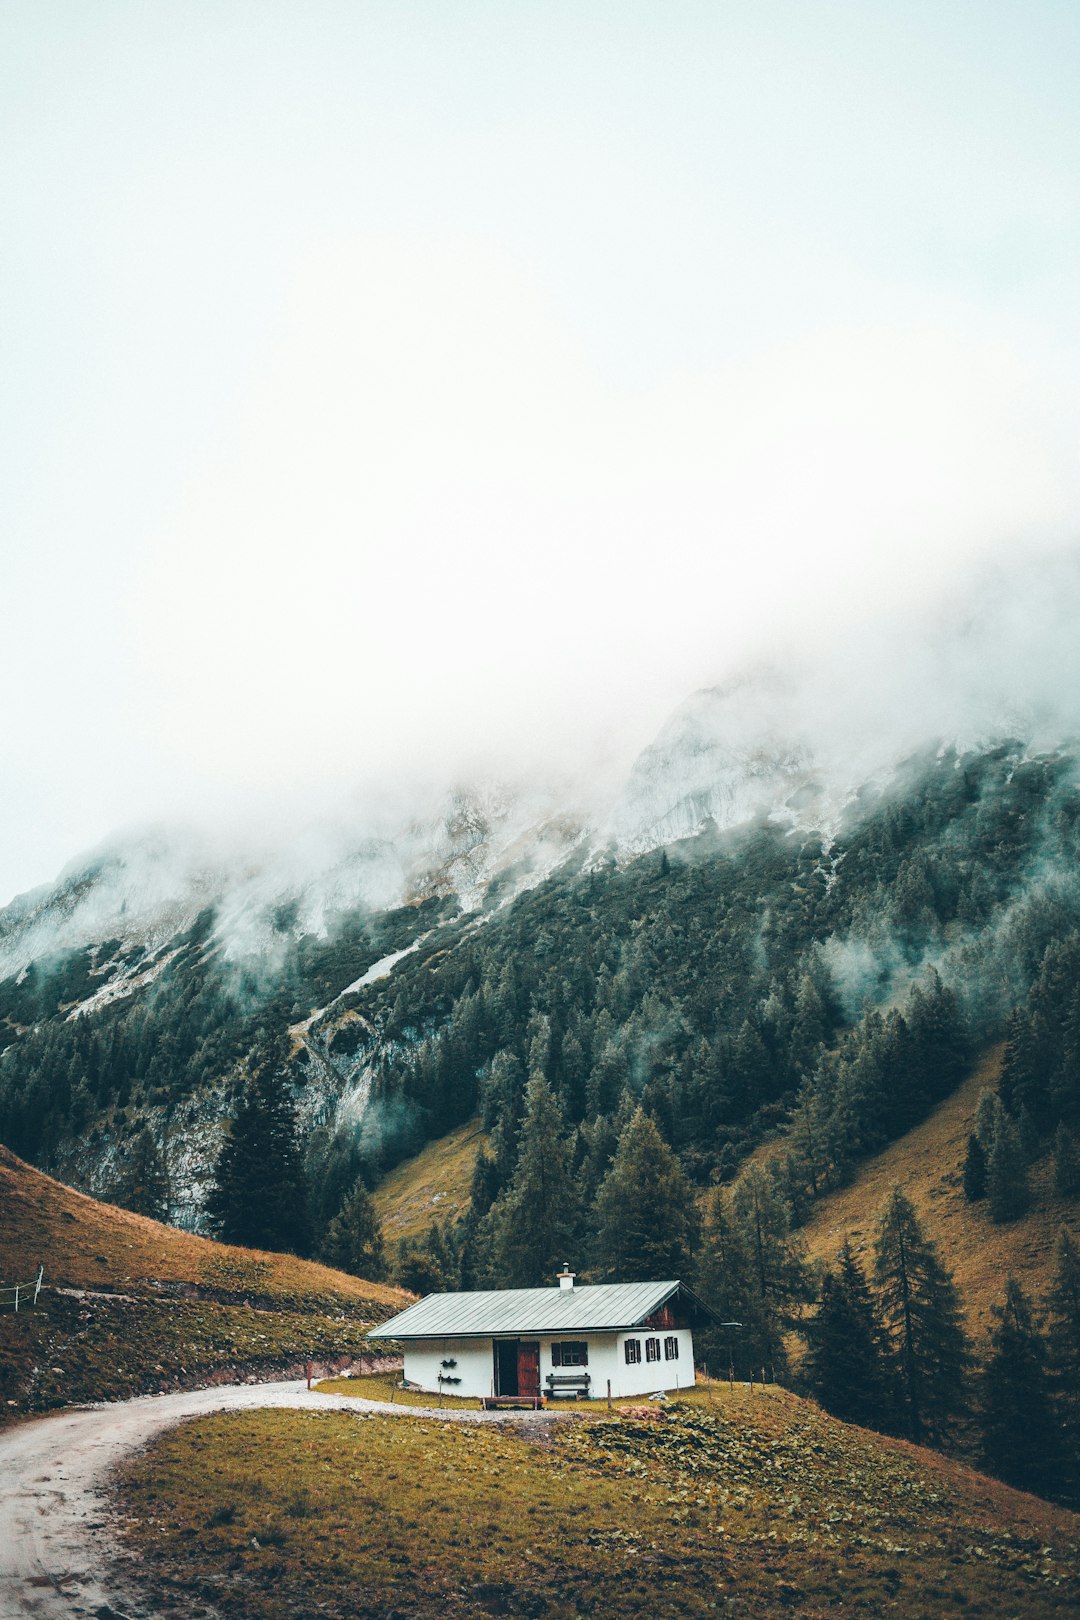 A small white house on the side of an alpine mountain, surrounded by dense forest and misty clouds, captured in a minimalist photographic style with a focus on natural beauty and serenity. The scene is captured from a low angle to emphasize the cabin’s architecture against nature’s backdrop, in the style of minimalist photography. –ar 85:128